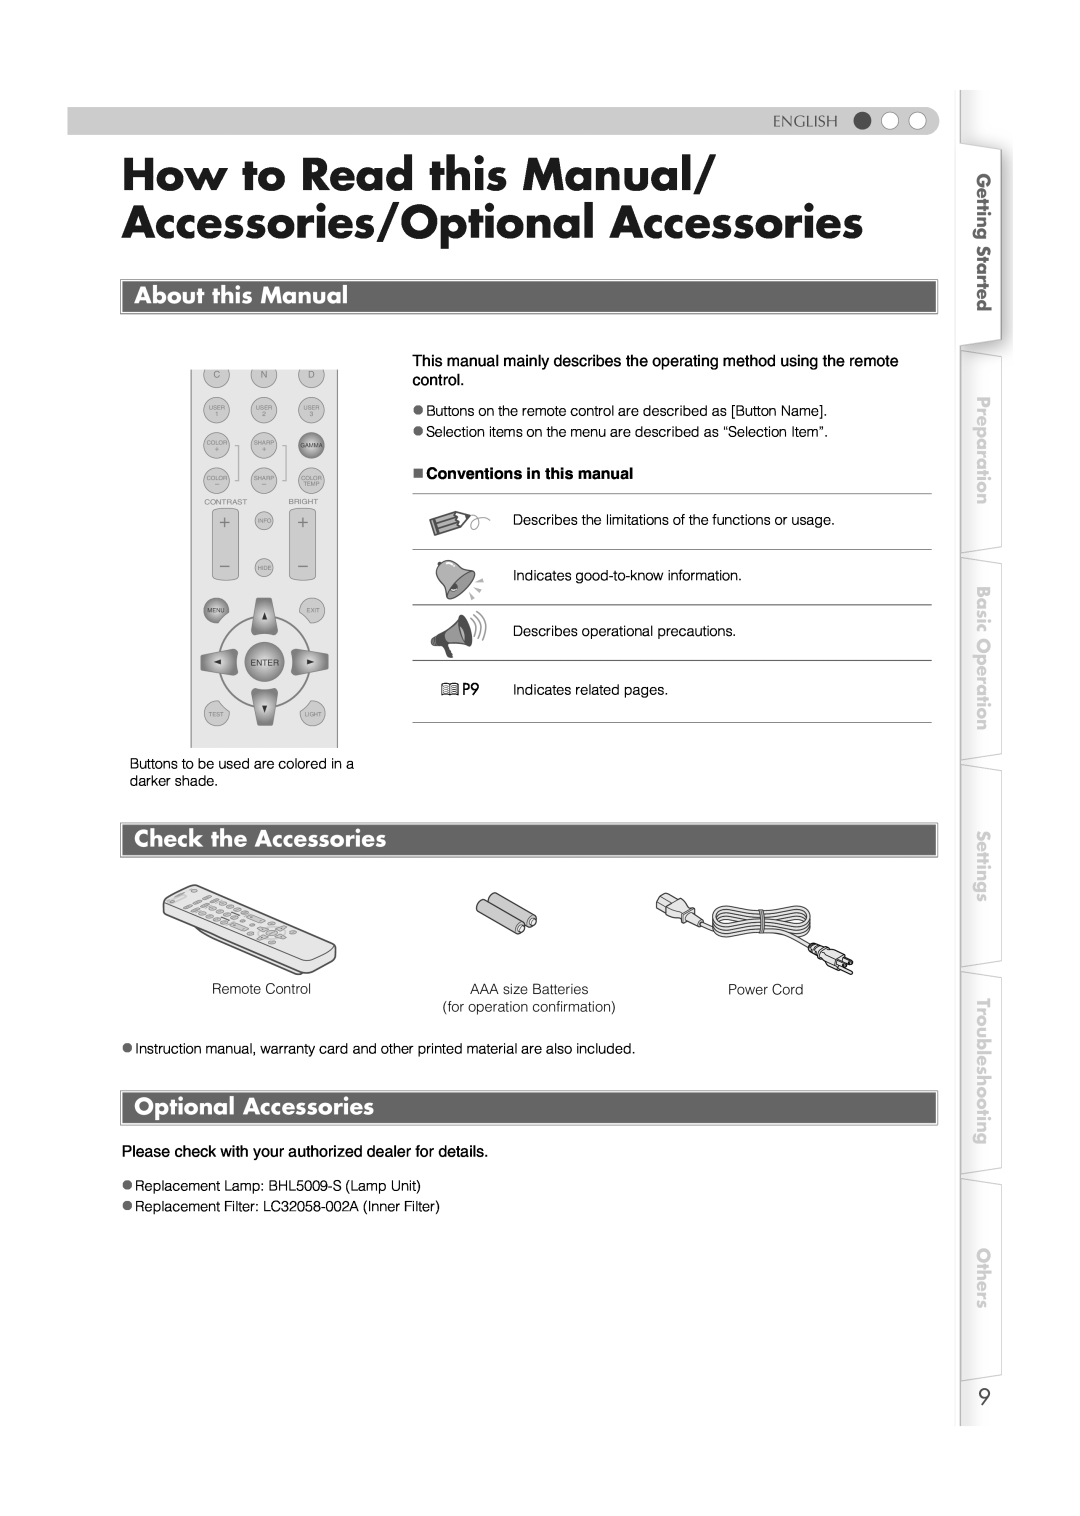 JVC DLA-RS2 How to Read this Manual/ Accessories/Optional Accessories, About this Manual, Check the Accessories, English 